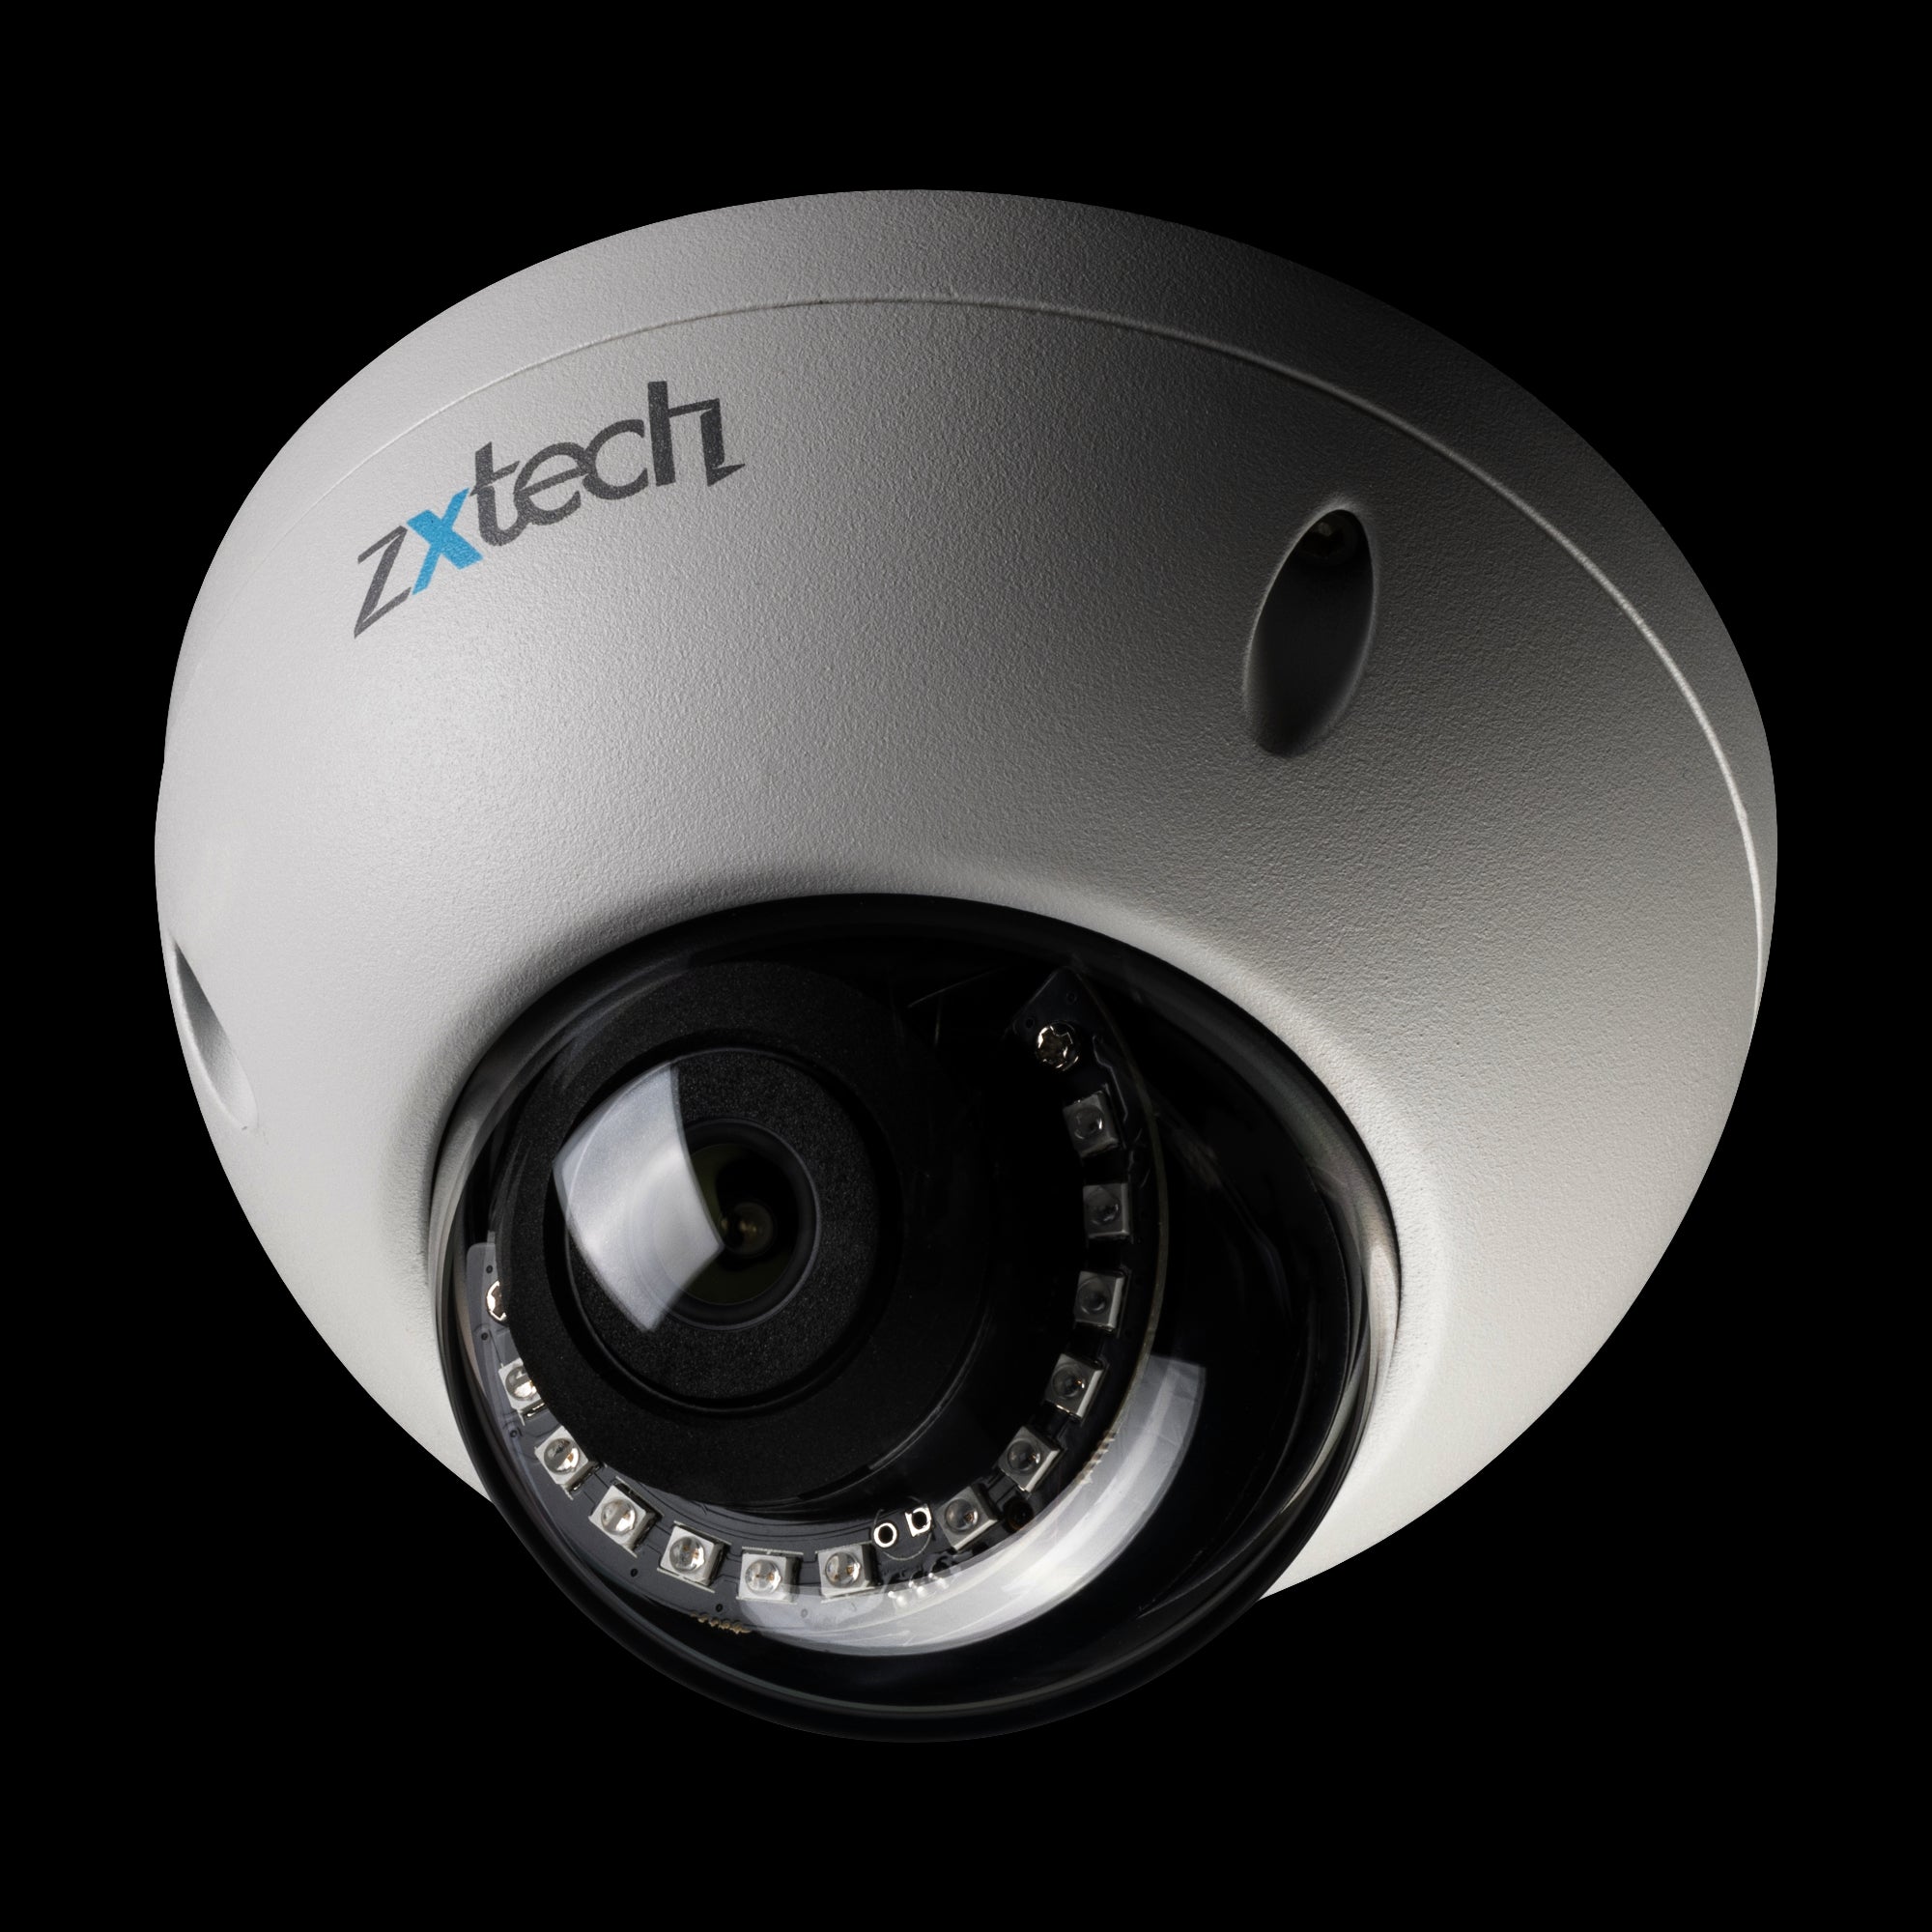 Zxtech IK10 4K CCTV System - 5 x IP PoE Cameras Face Detection Outdoor Sony Starvis Enhanced Night Vision  | IK5A9Y